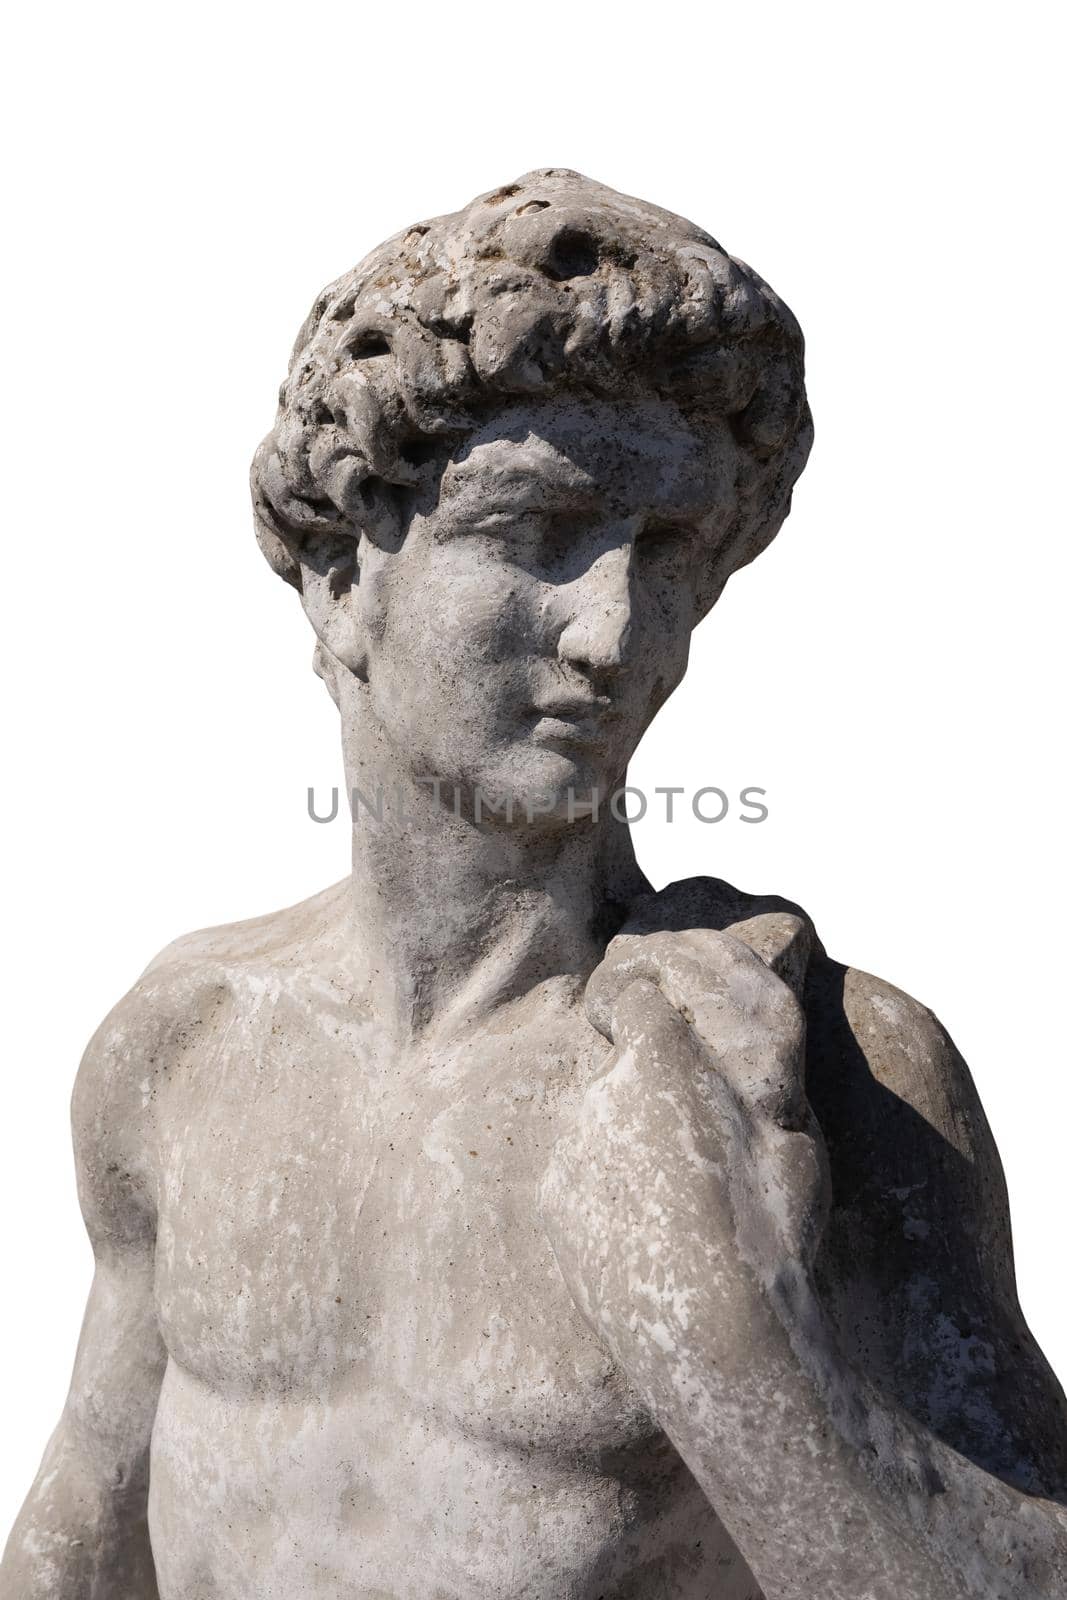 Close up of ancient stone sculpture of naked man on white background. art and classical style romantic figurative stone sculpture.